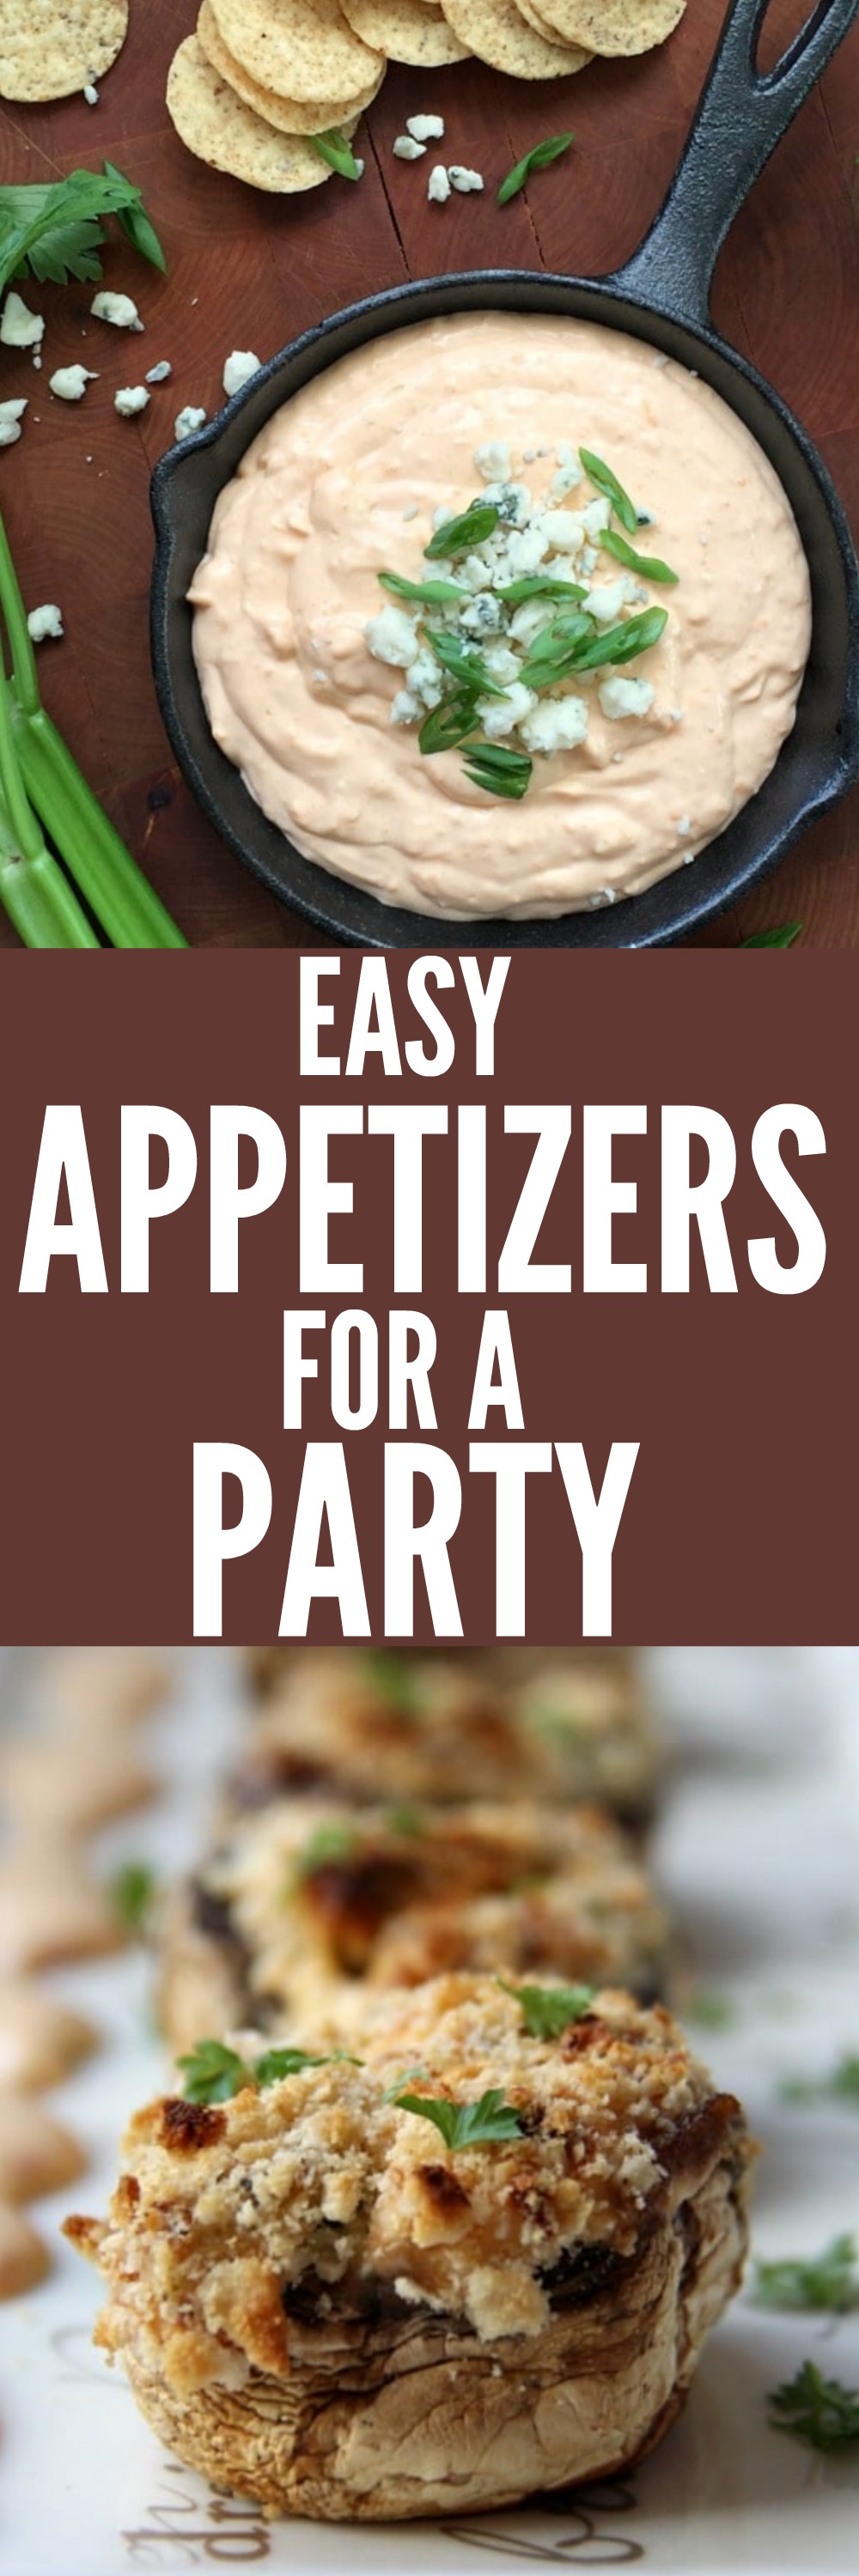 The Best Easy Appetizers For a Party